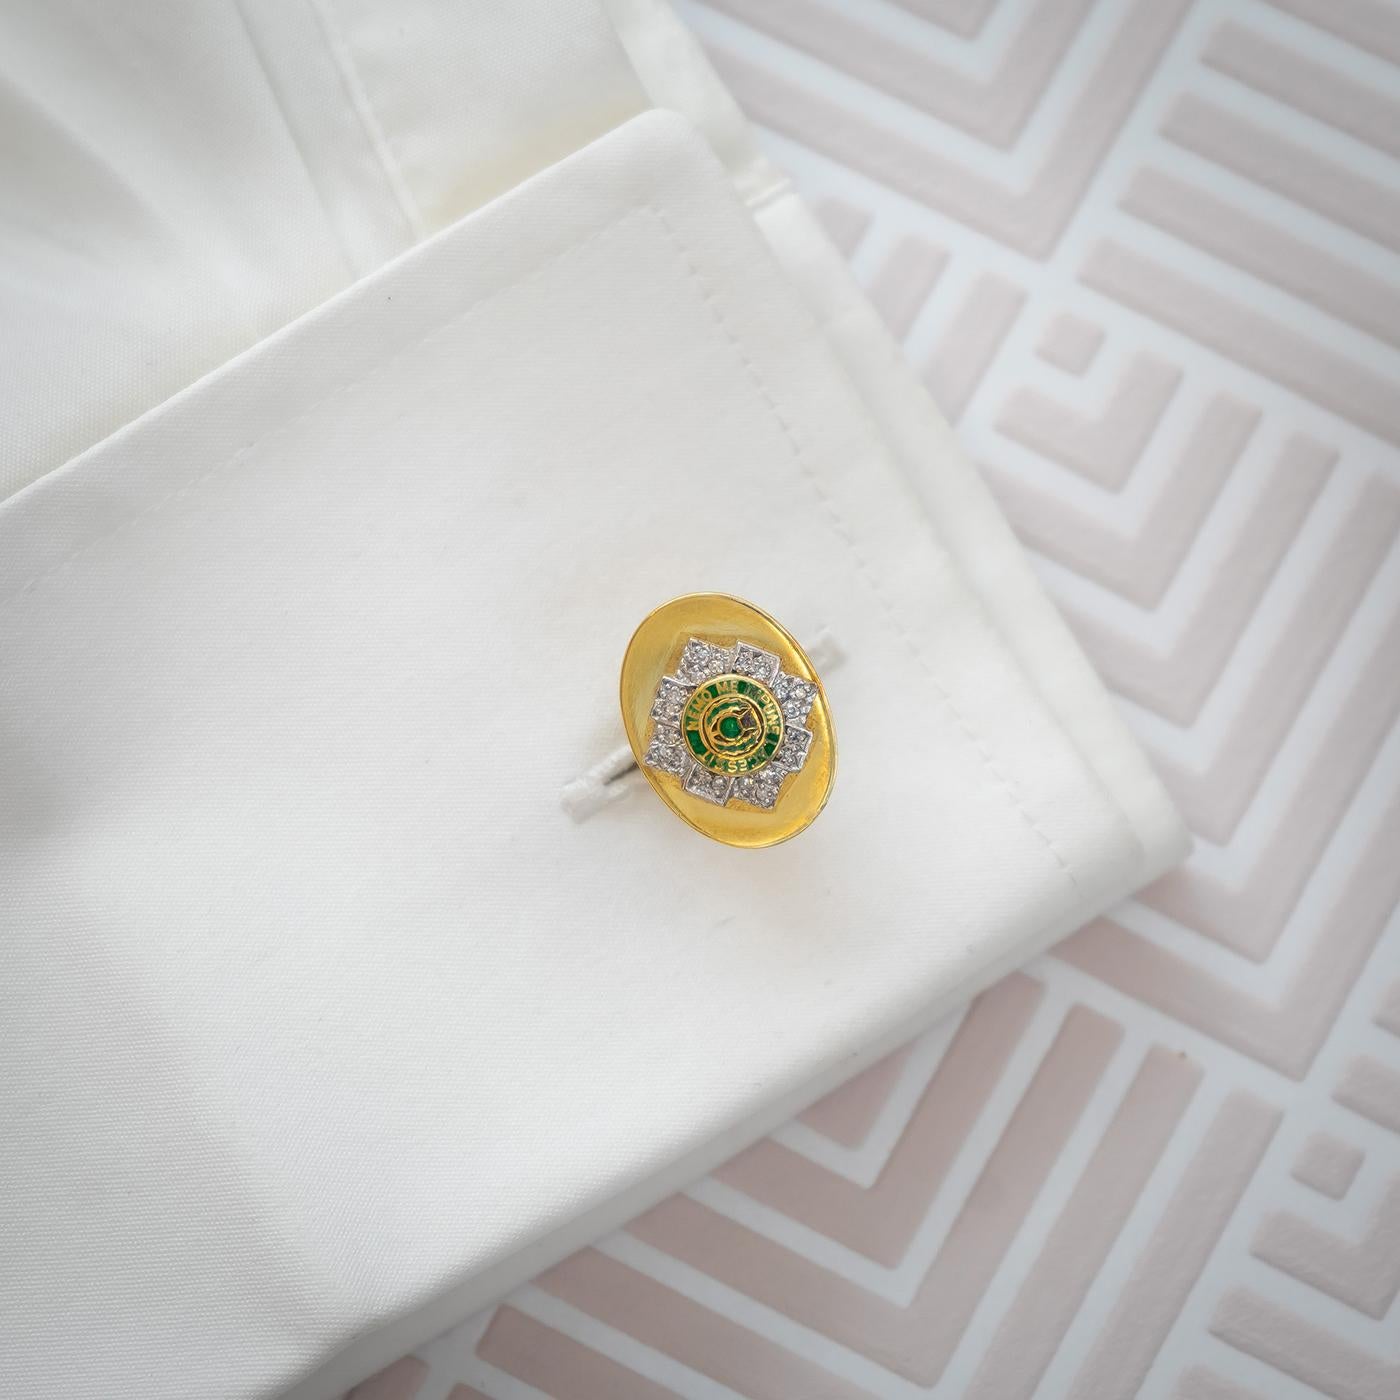 A pair of Scots Guards Cufflinks, with green enamel, bearing the motto nemo me impune lacessit, no one provokes me with impunity, surround by eight-cut diamonds in white gold settings, mounted on yellow gold oval plates, with bar